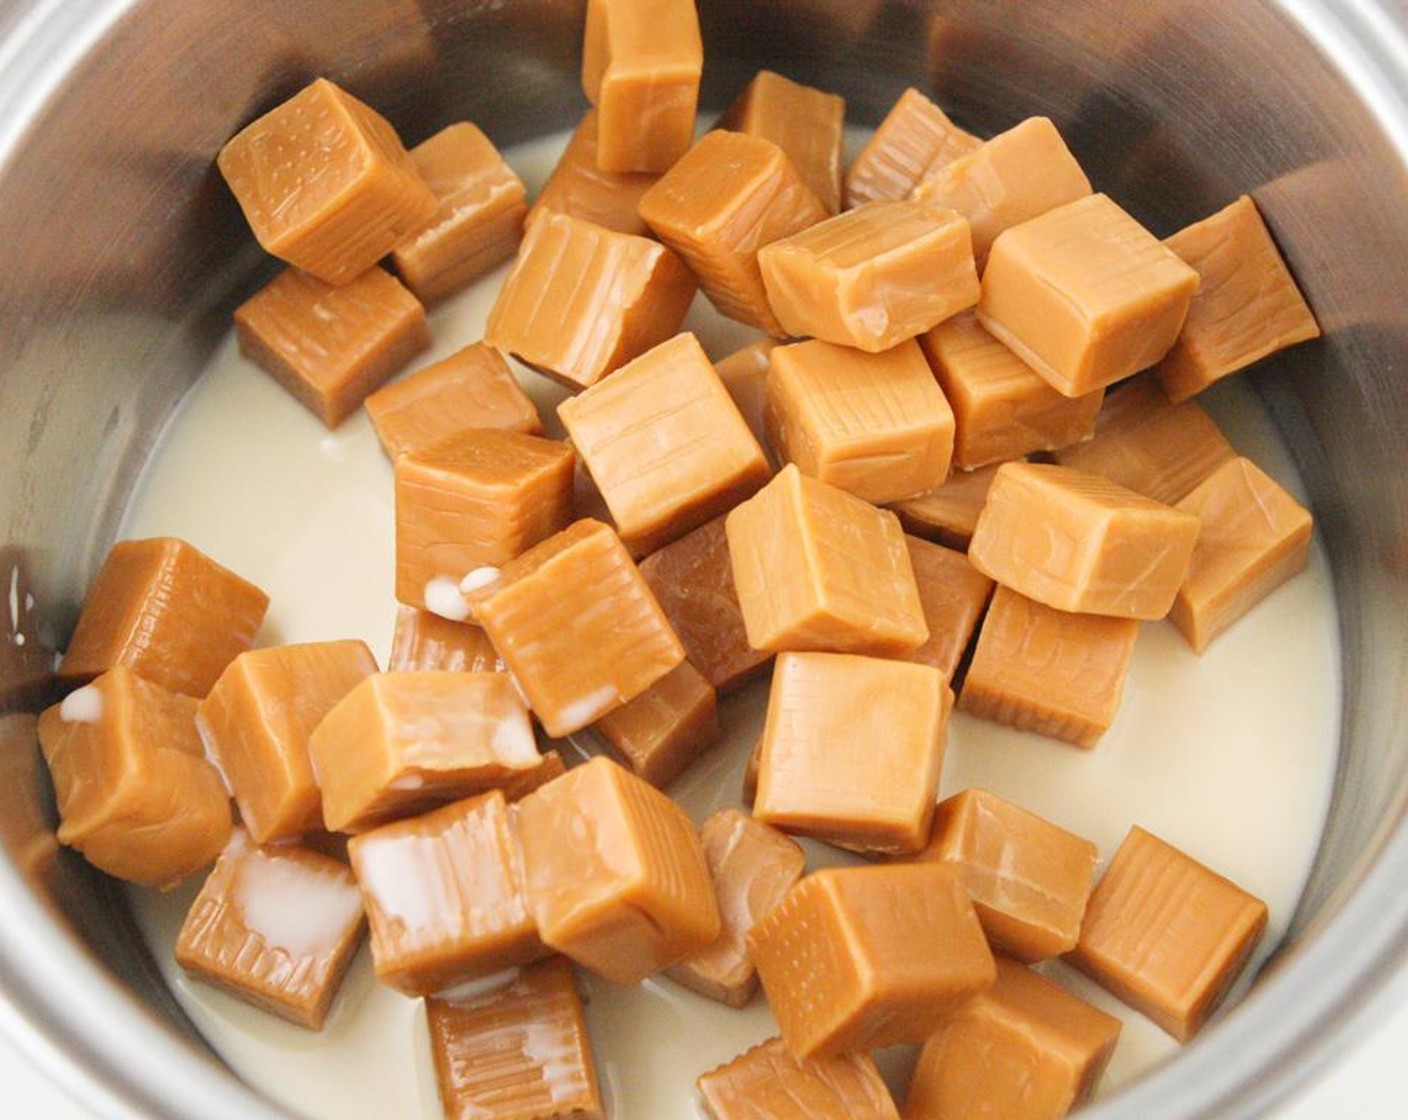 step 9 Add the Caramel Candies (1 3/4 cups) and Evaporated Milk (1/4 cup) to a small saucepan. Cook over medium-low heat, stirring constantly, until caramel is melted and smooth.